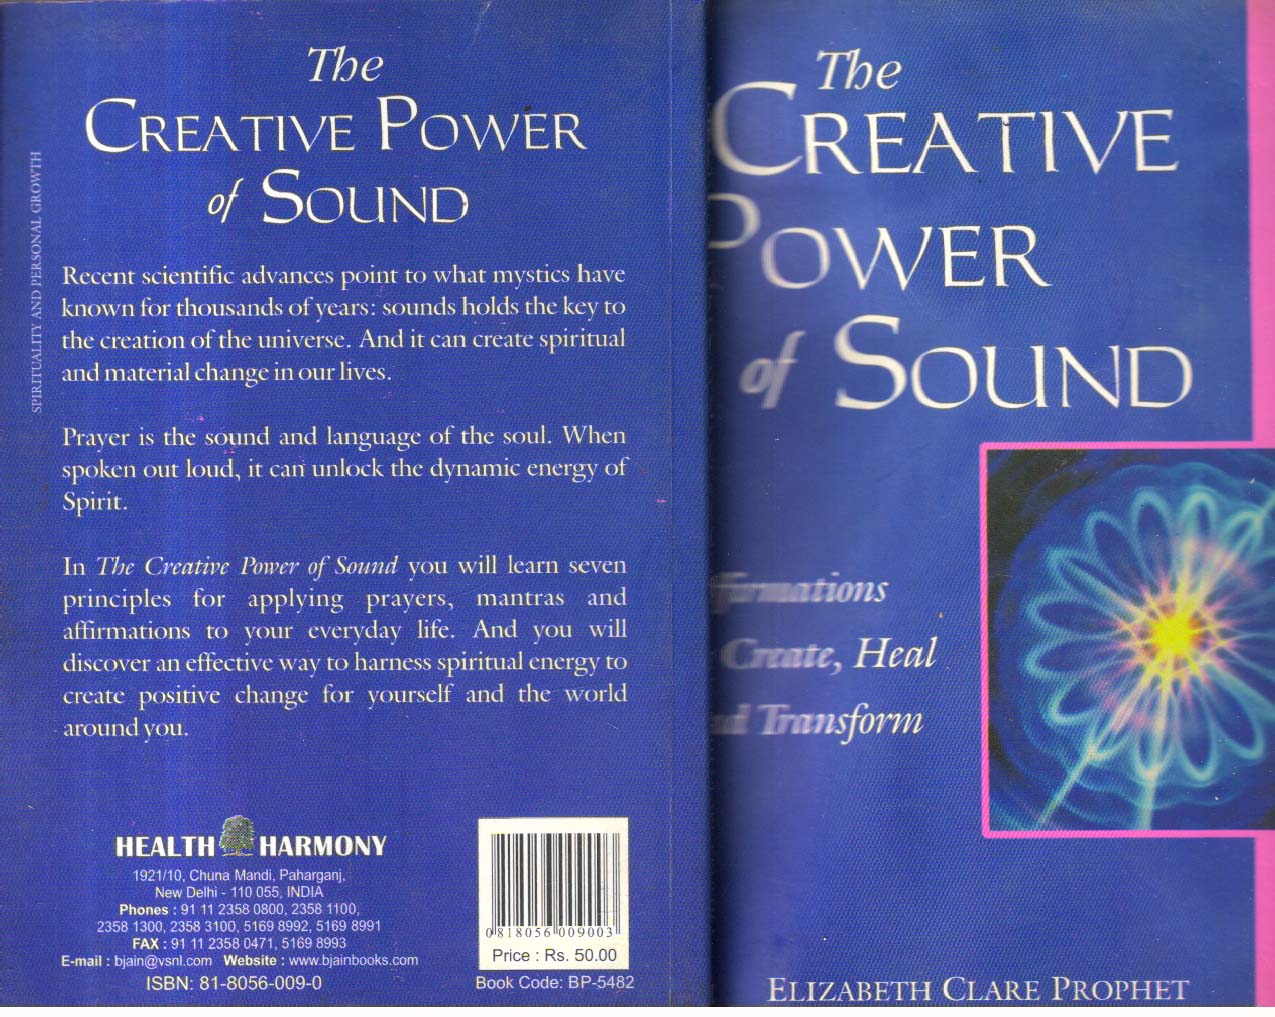 The Creative Power of Sound.